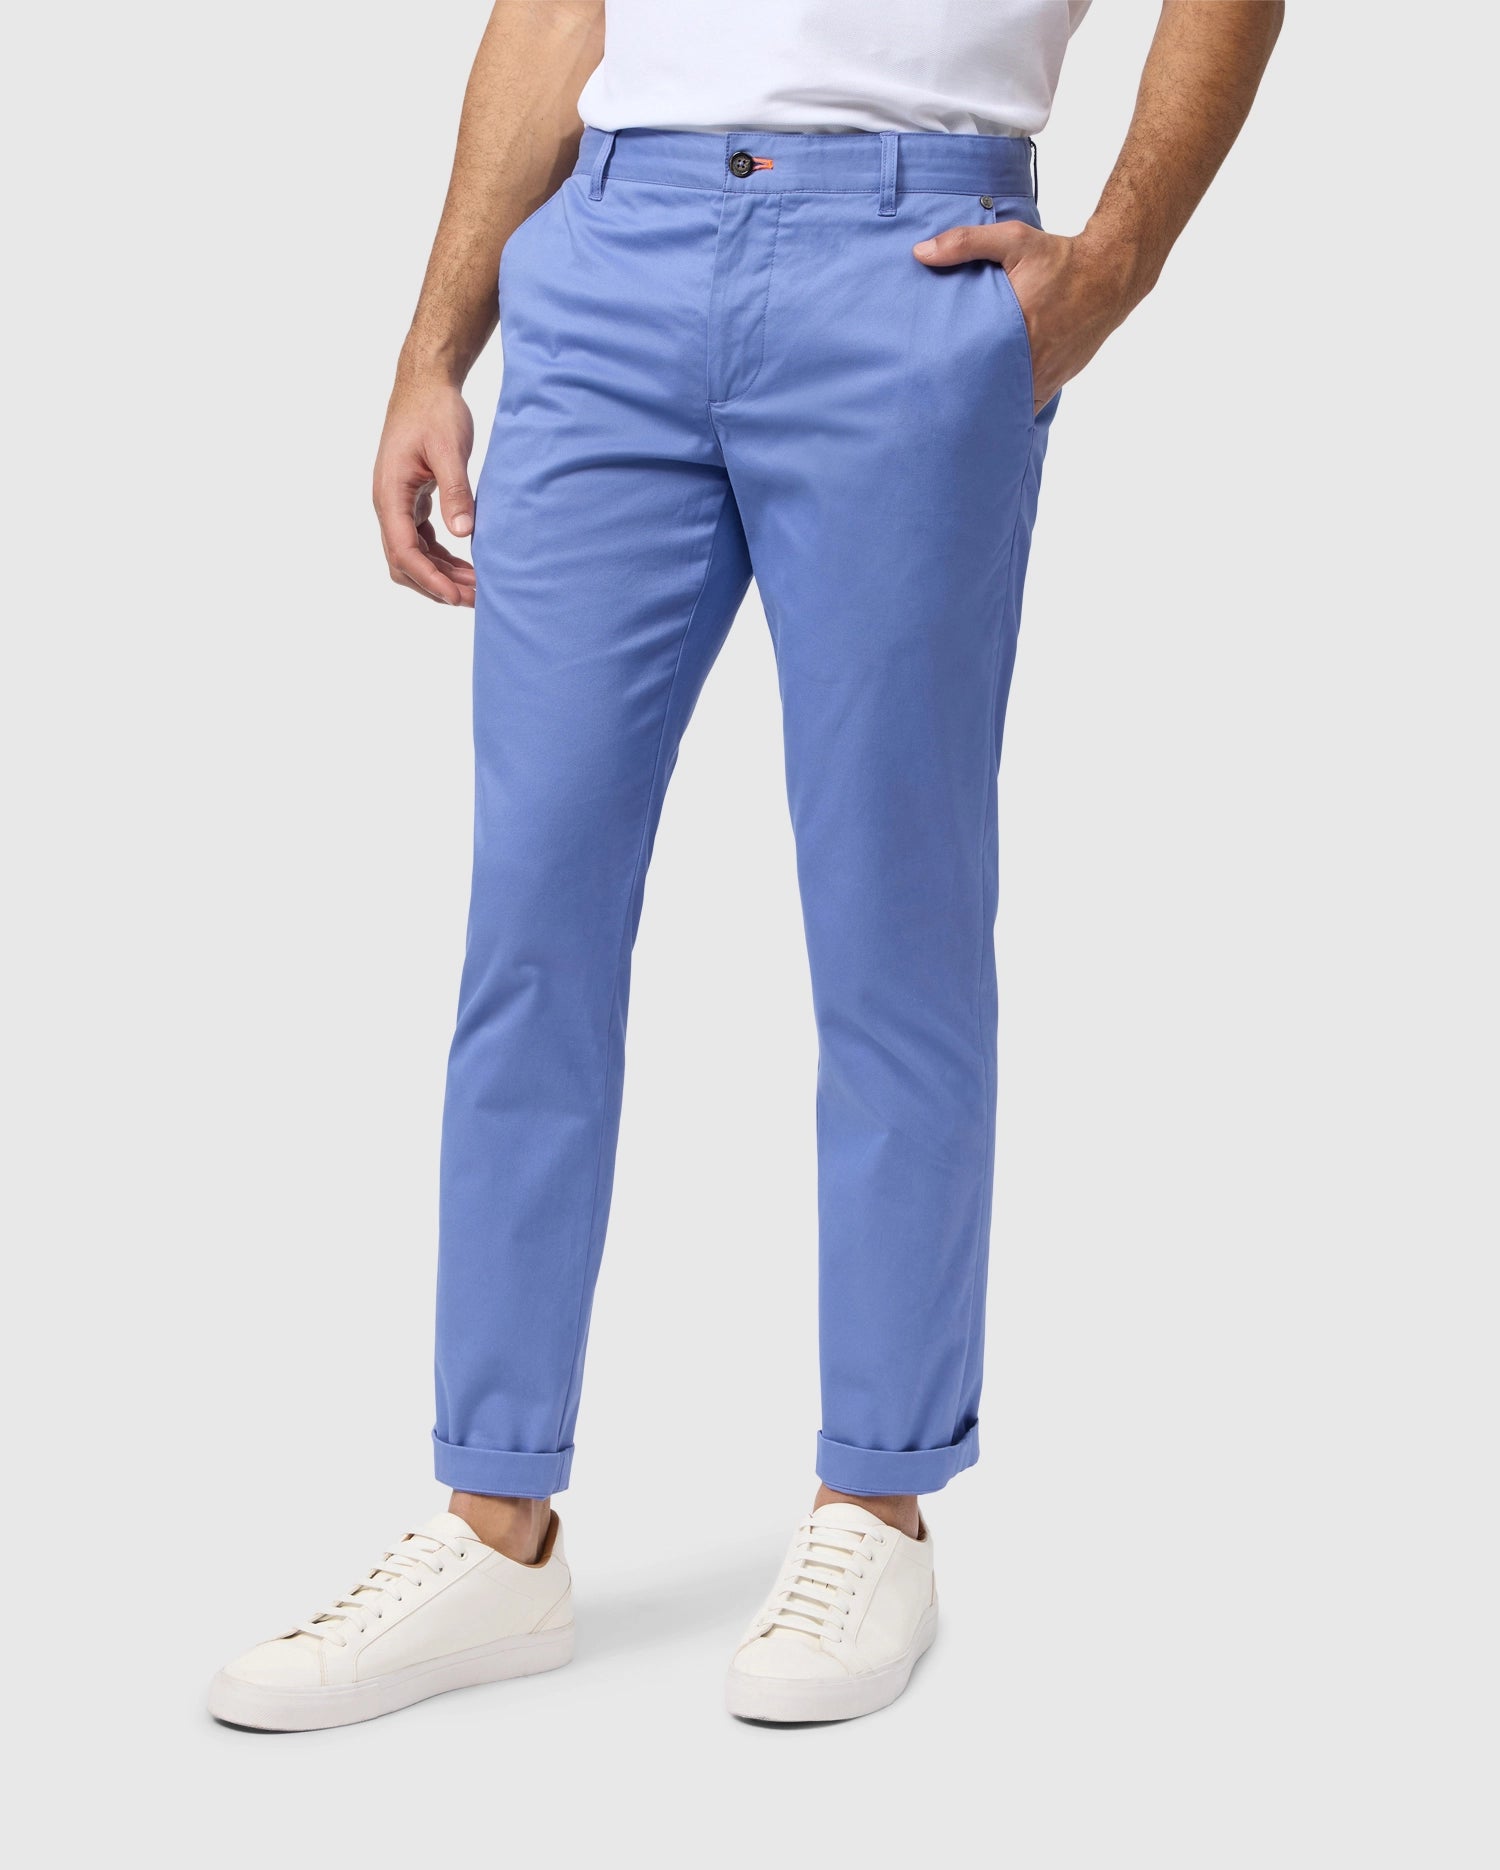 A man wearing light blue embroidered Psycho Bunny chino pants and white sneakers, cropped to show from the waist down against a neutral background.